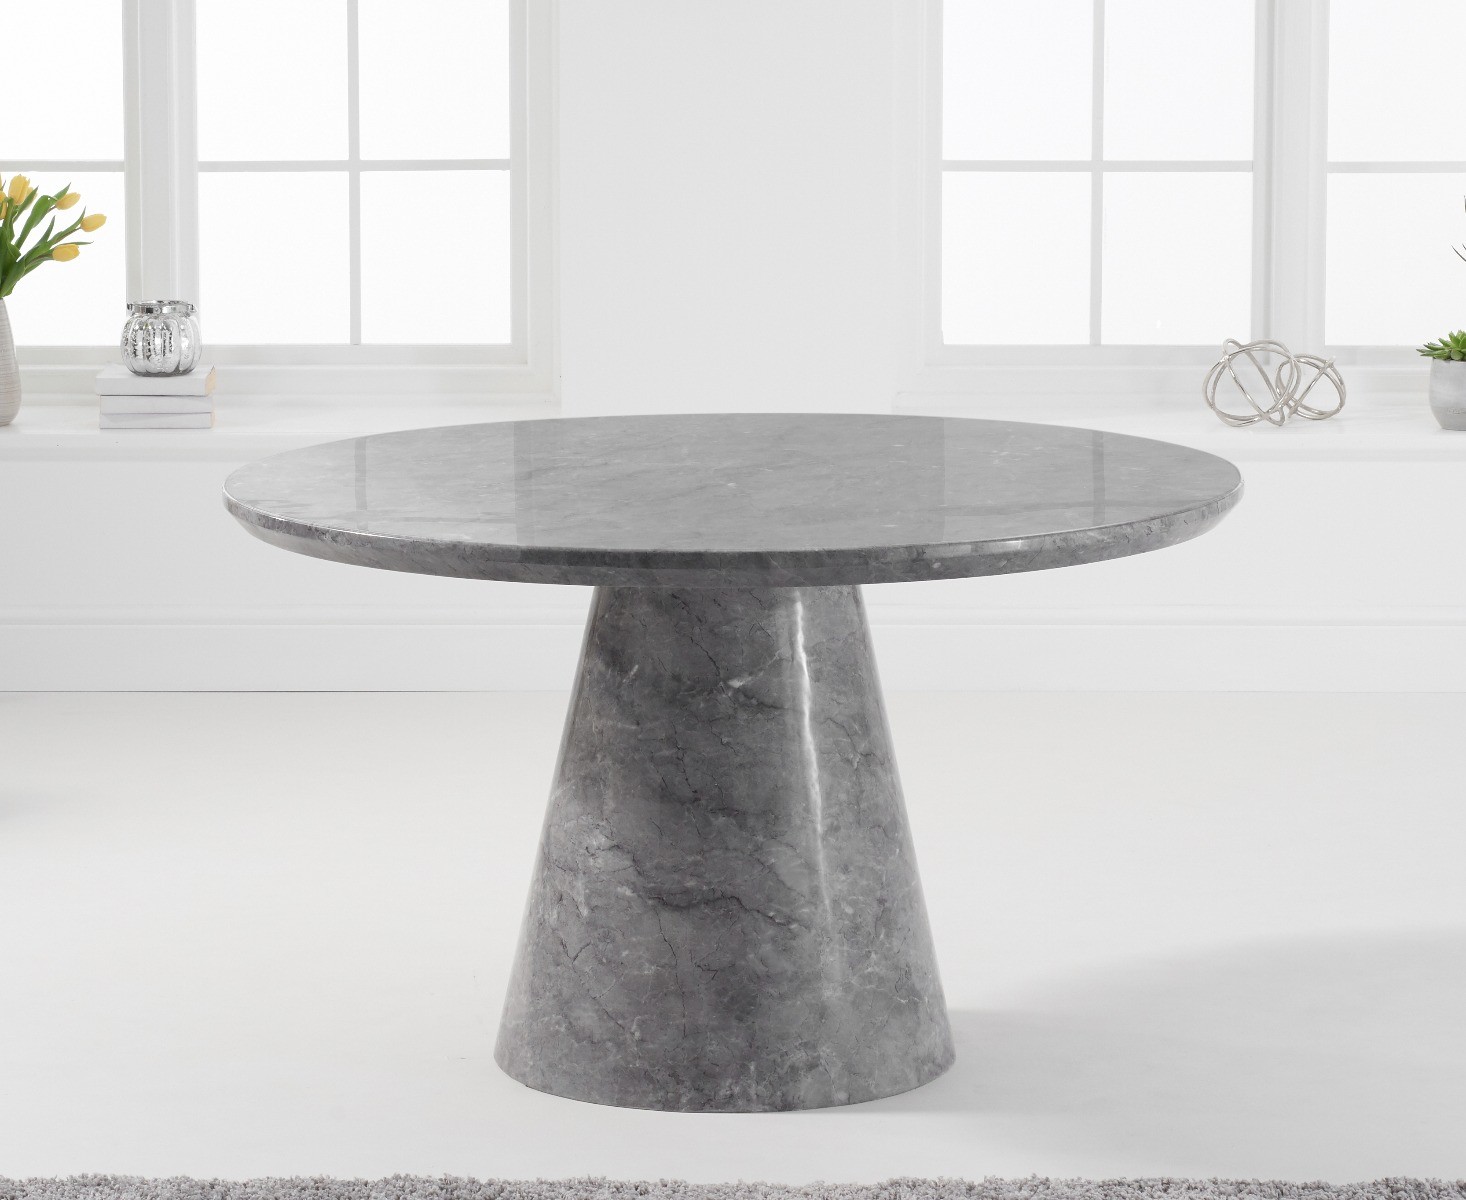 Photo 1 of Ravello 130cm round grey marble dining table with 4 grey aldo chairs